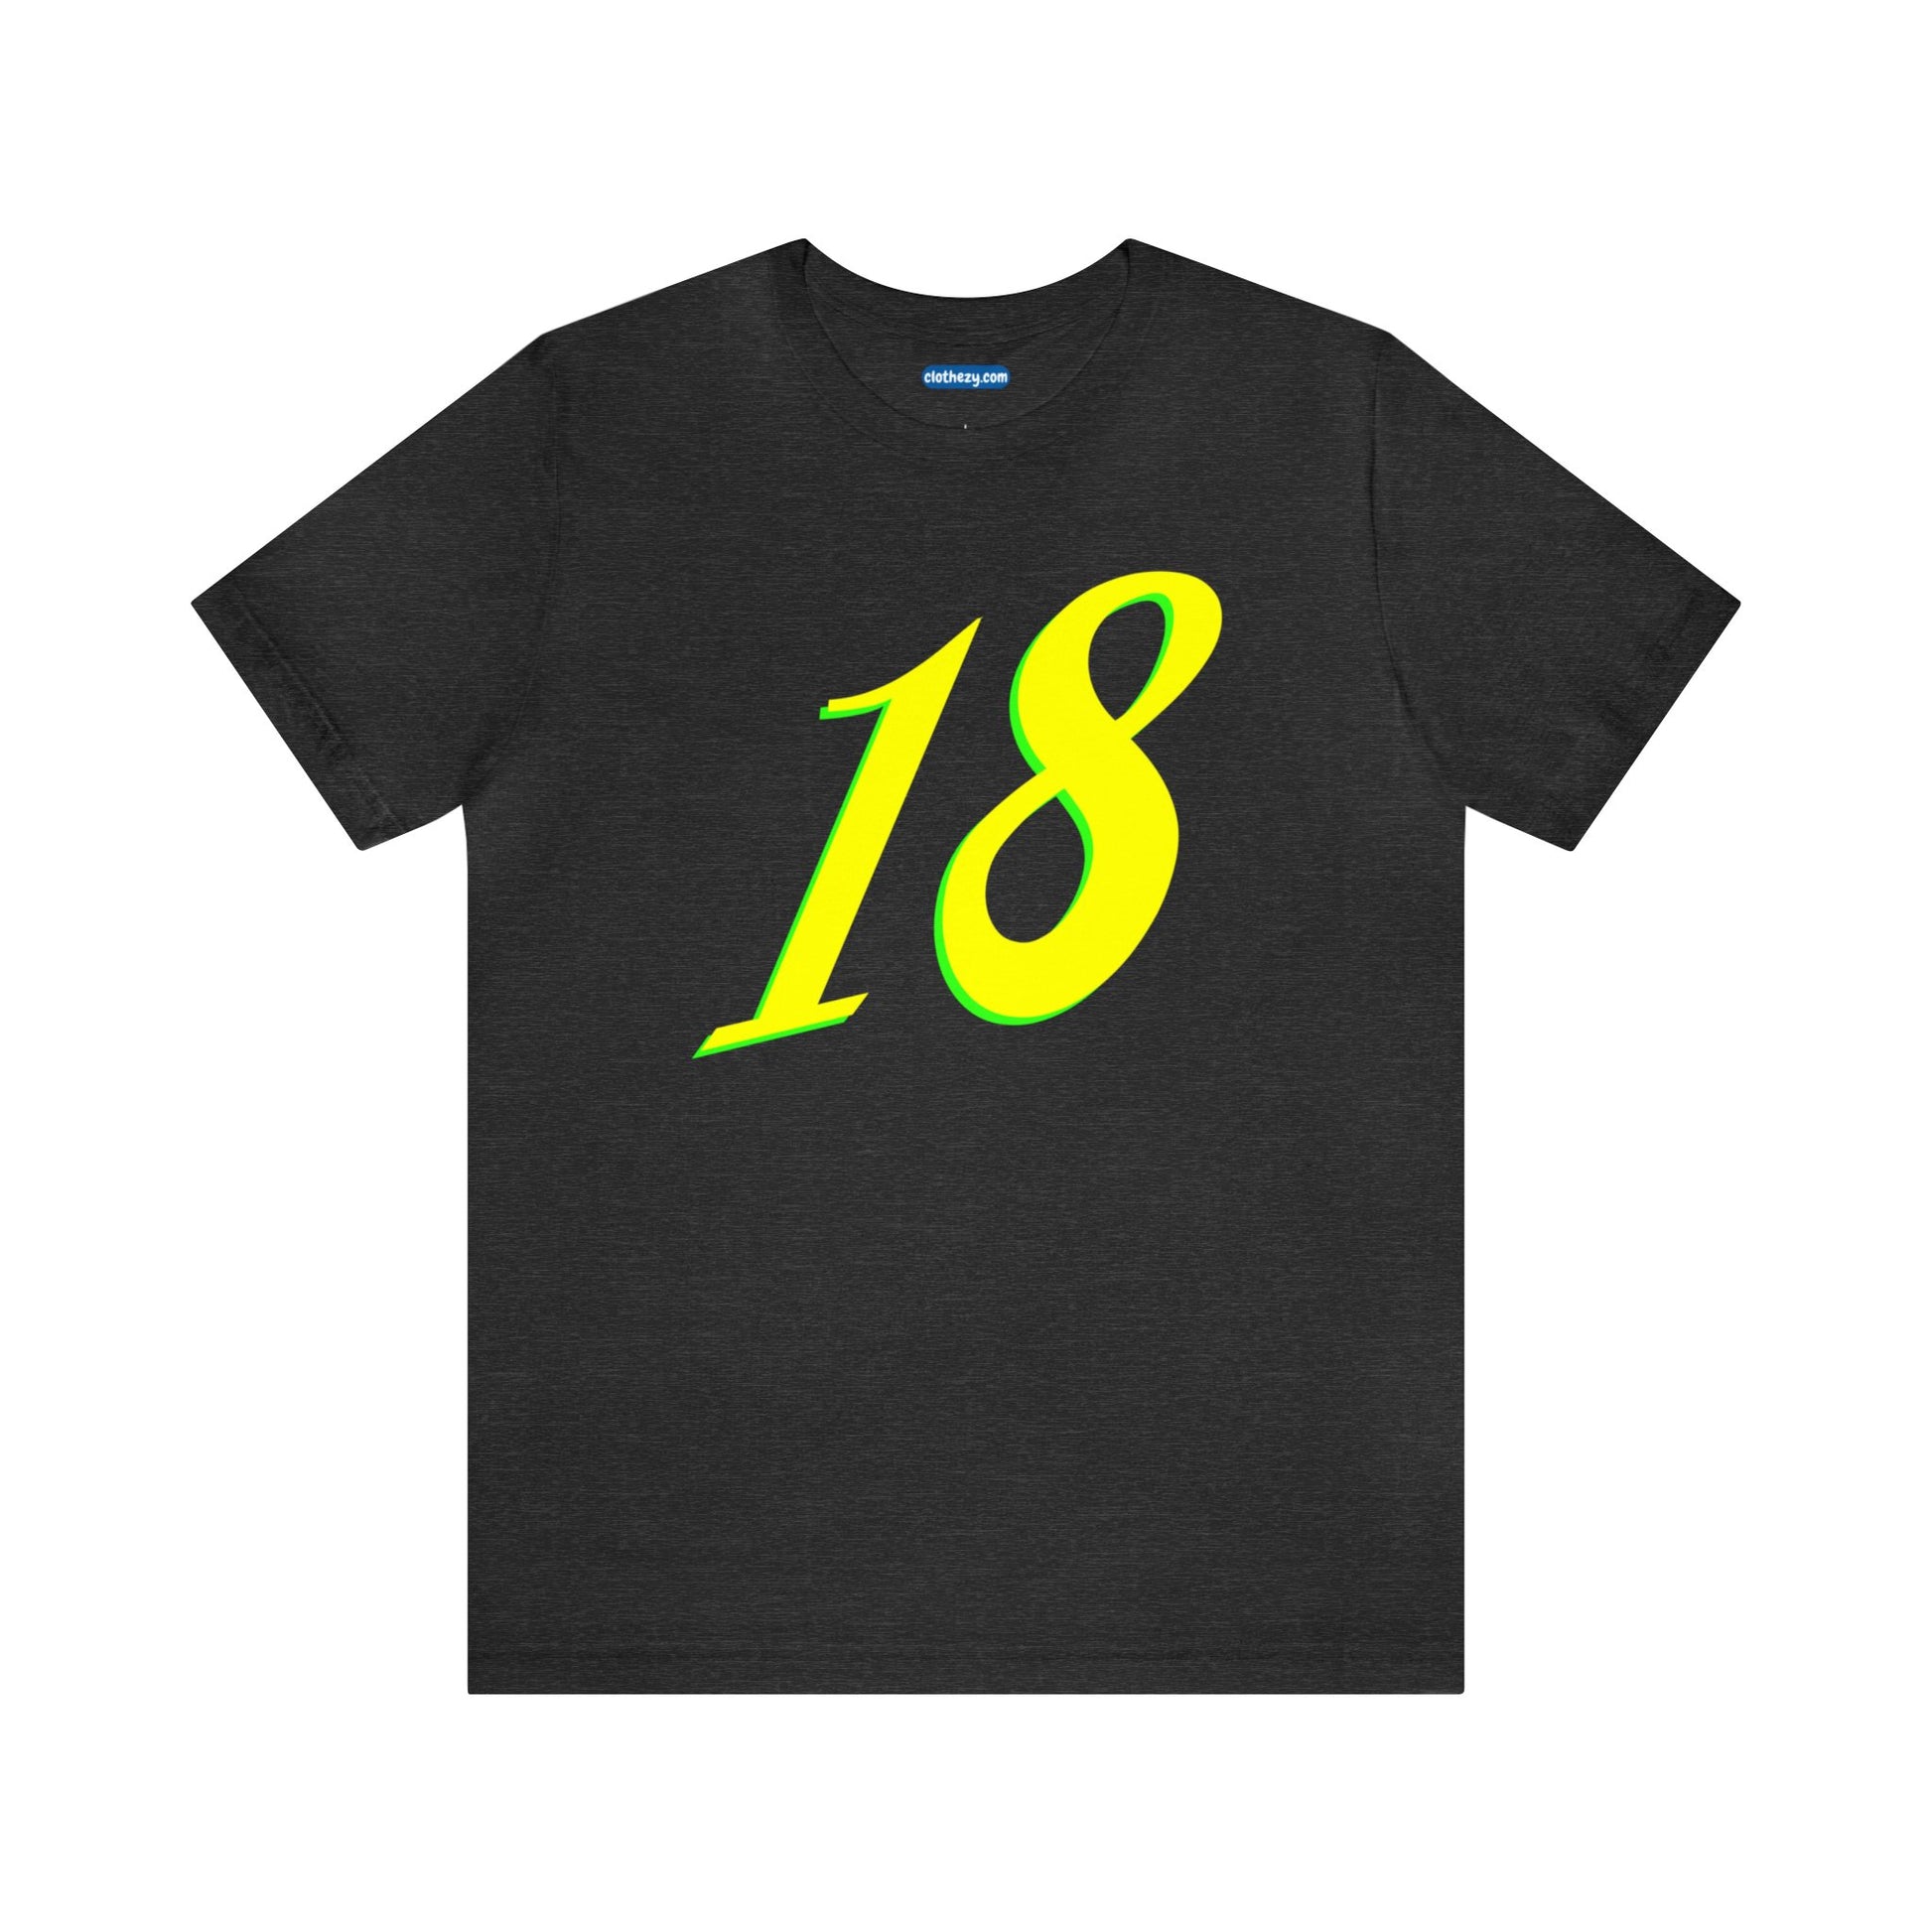 Number 18 Design - Soft Cotton Tee for birthdays and celebrations, Gift for friends and family, Multiple Options by clothezy.com in Dark Grey Heather Size Small - Buy Now